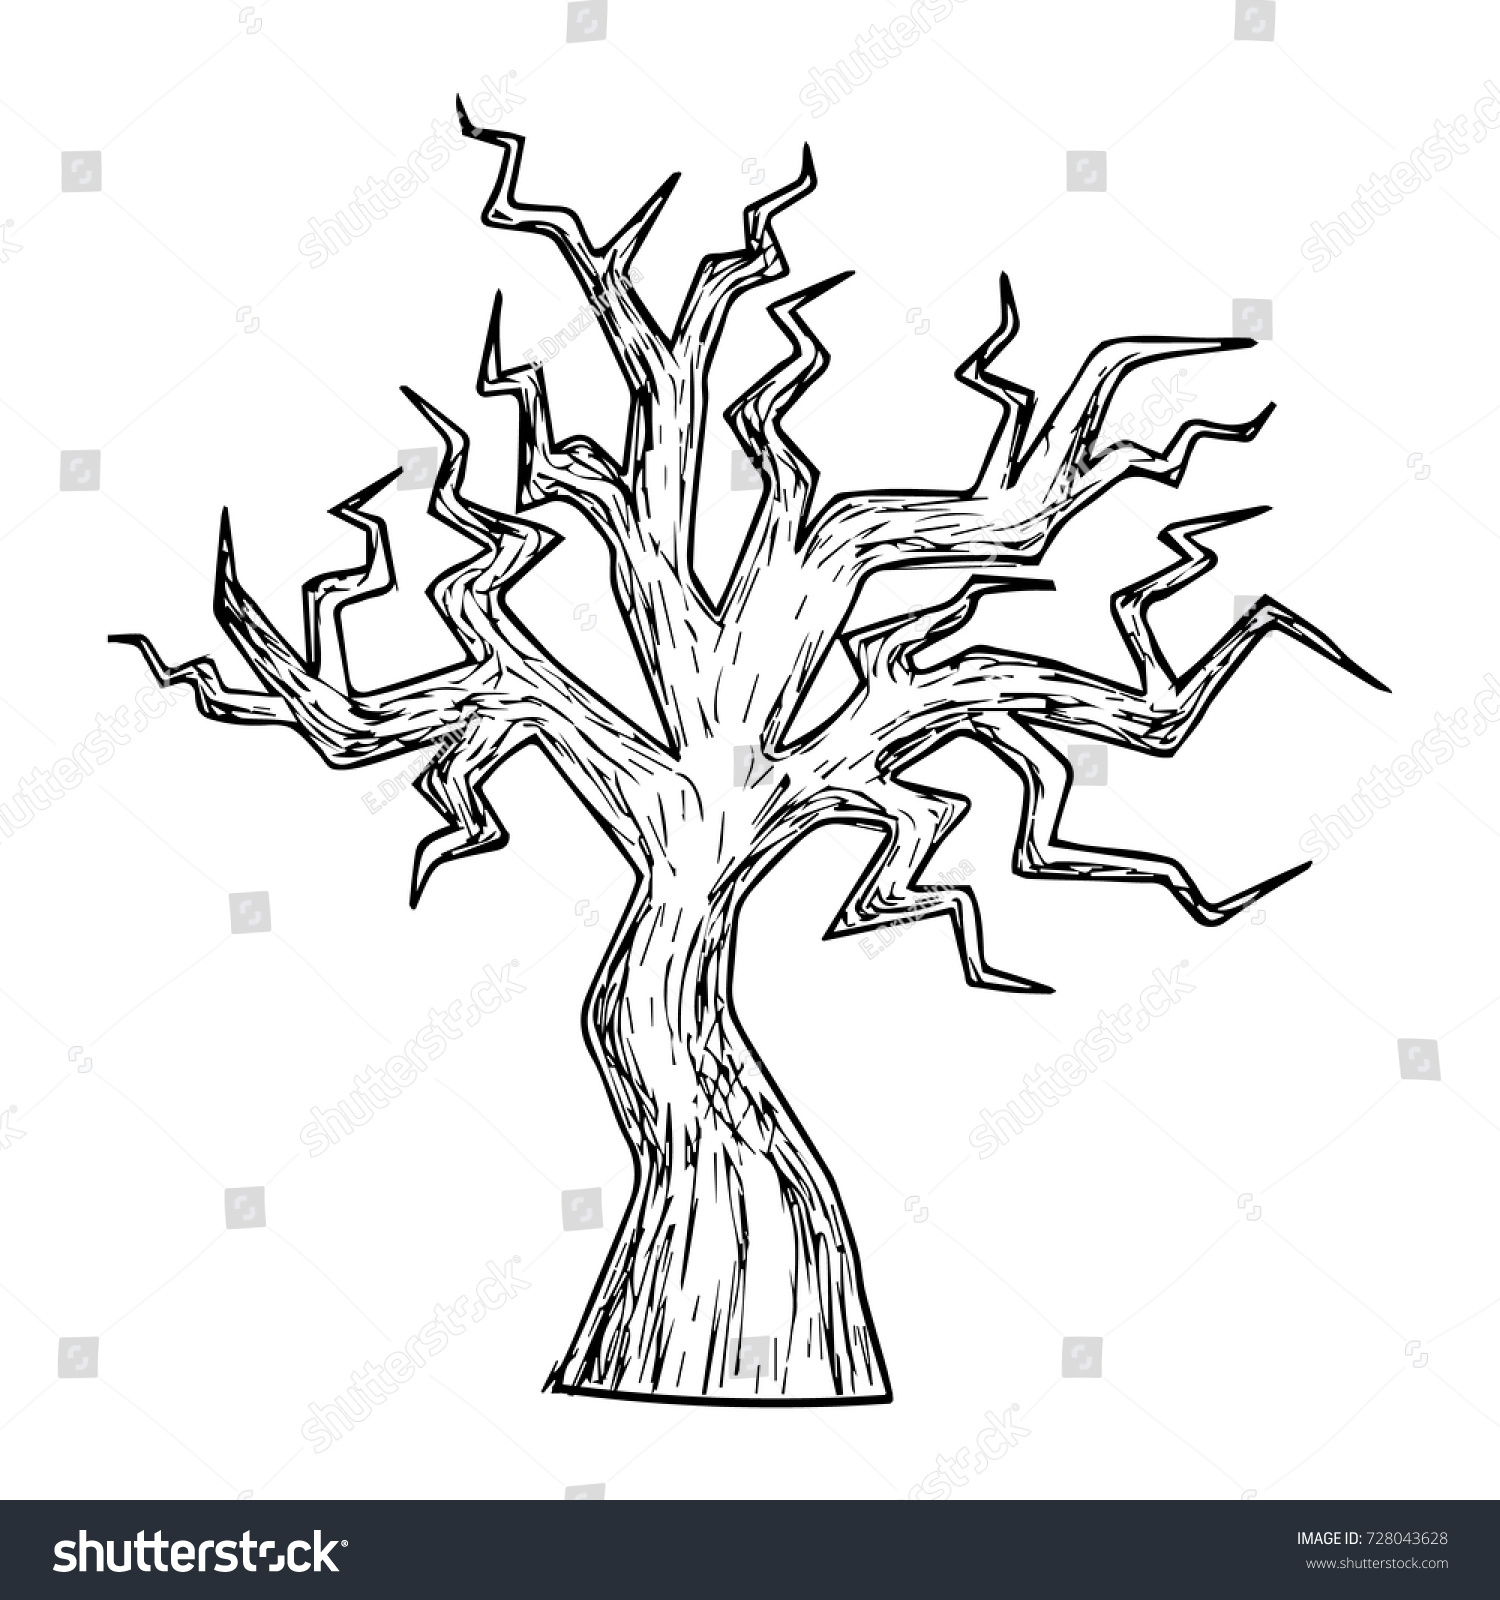 Old Dry Tree Scary Halloween Sketch Stock Vector 728043628 ...